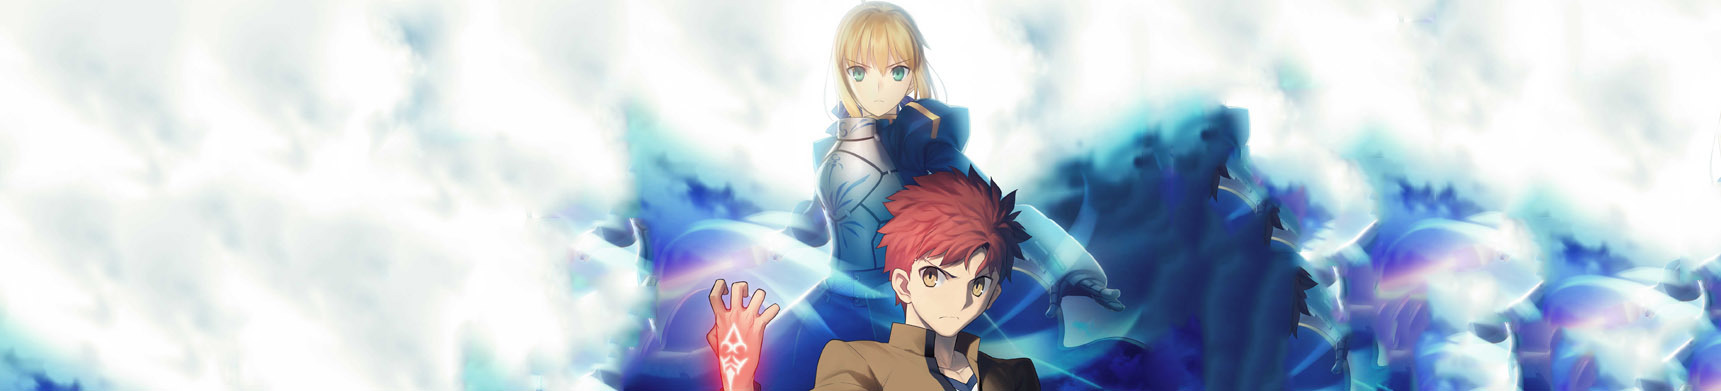 Banner for Fate/stay night: Unlimited Blade Works